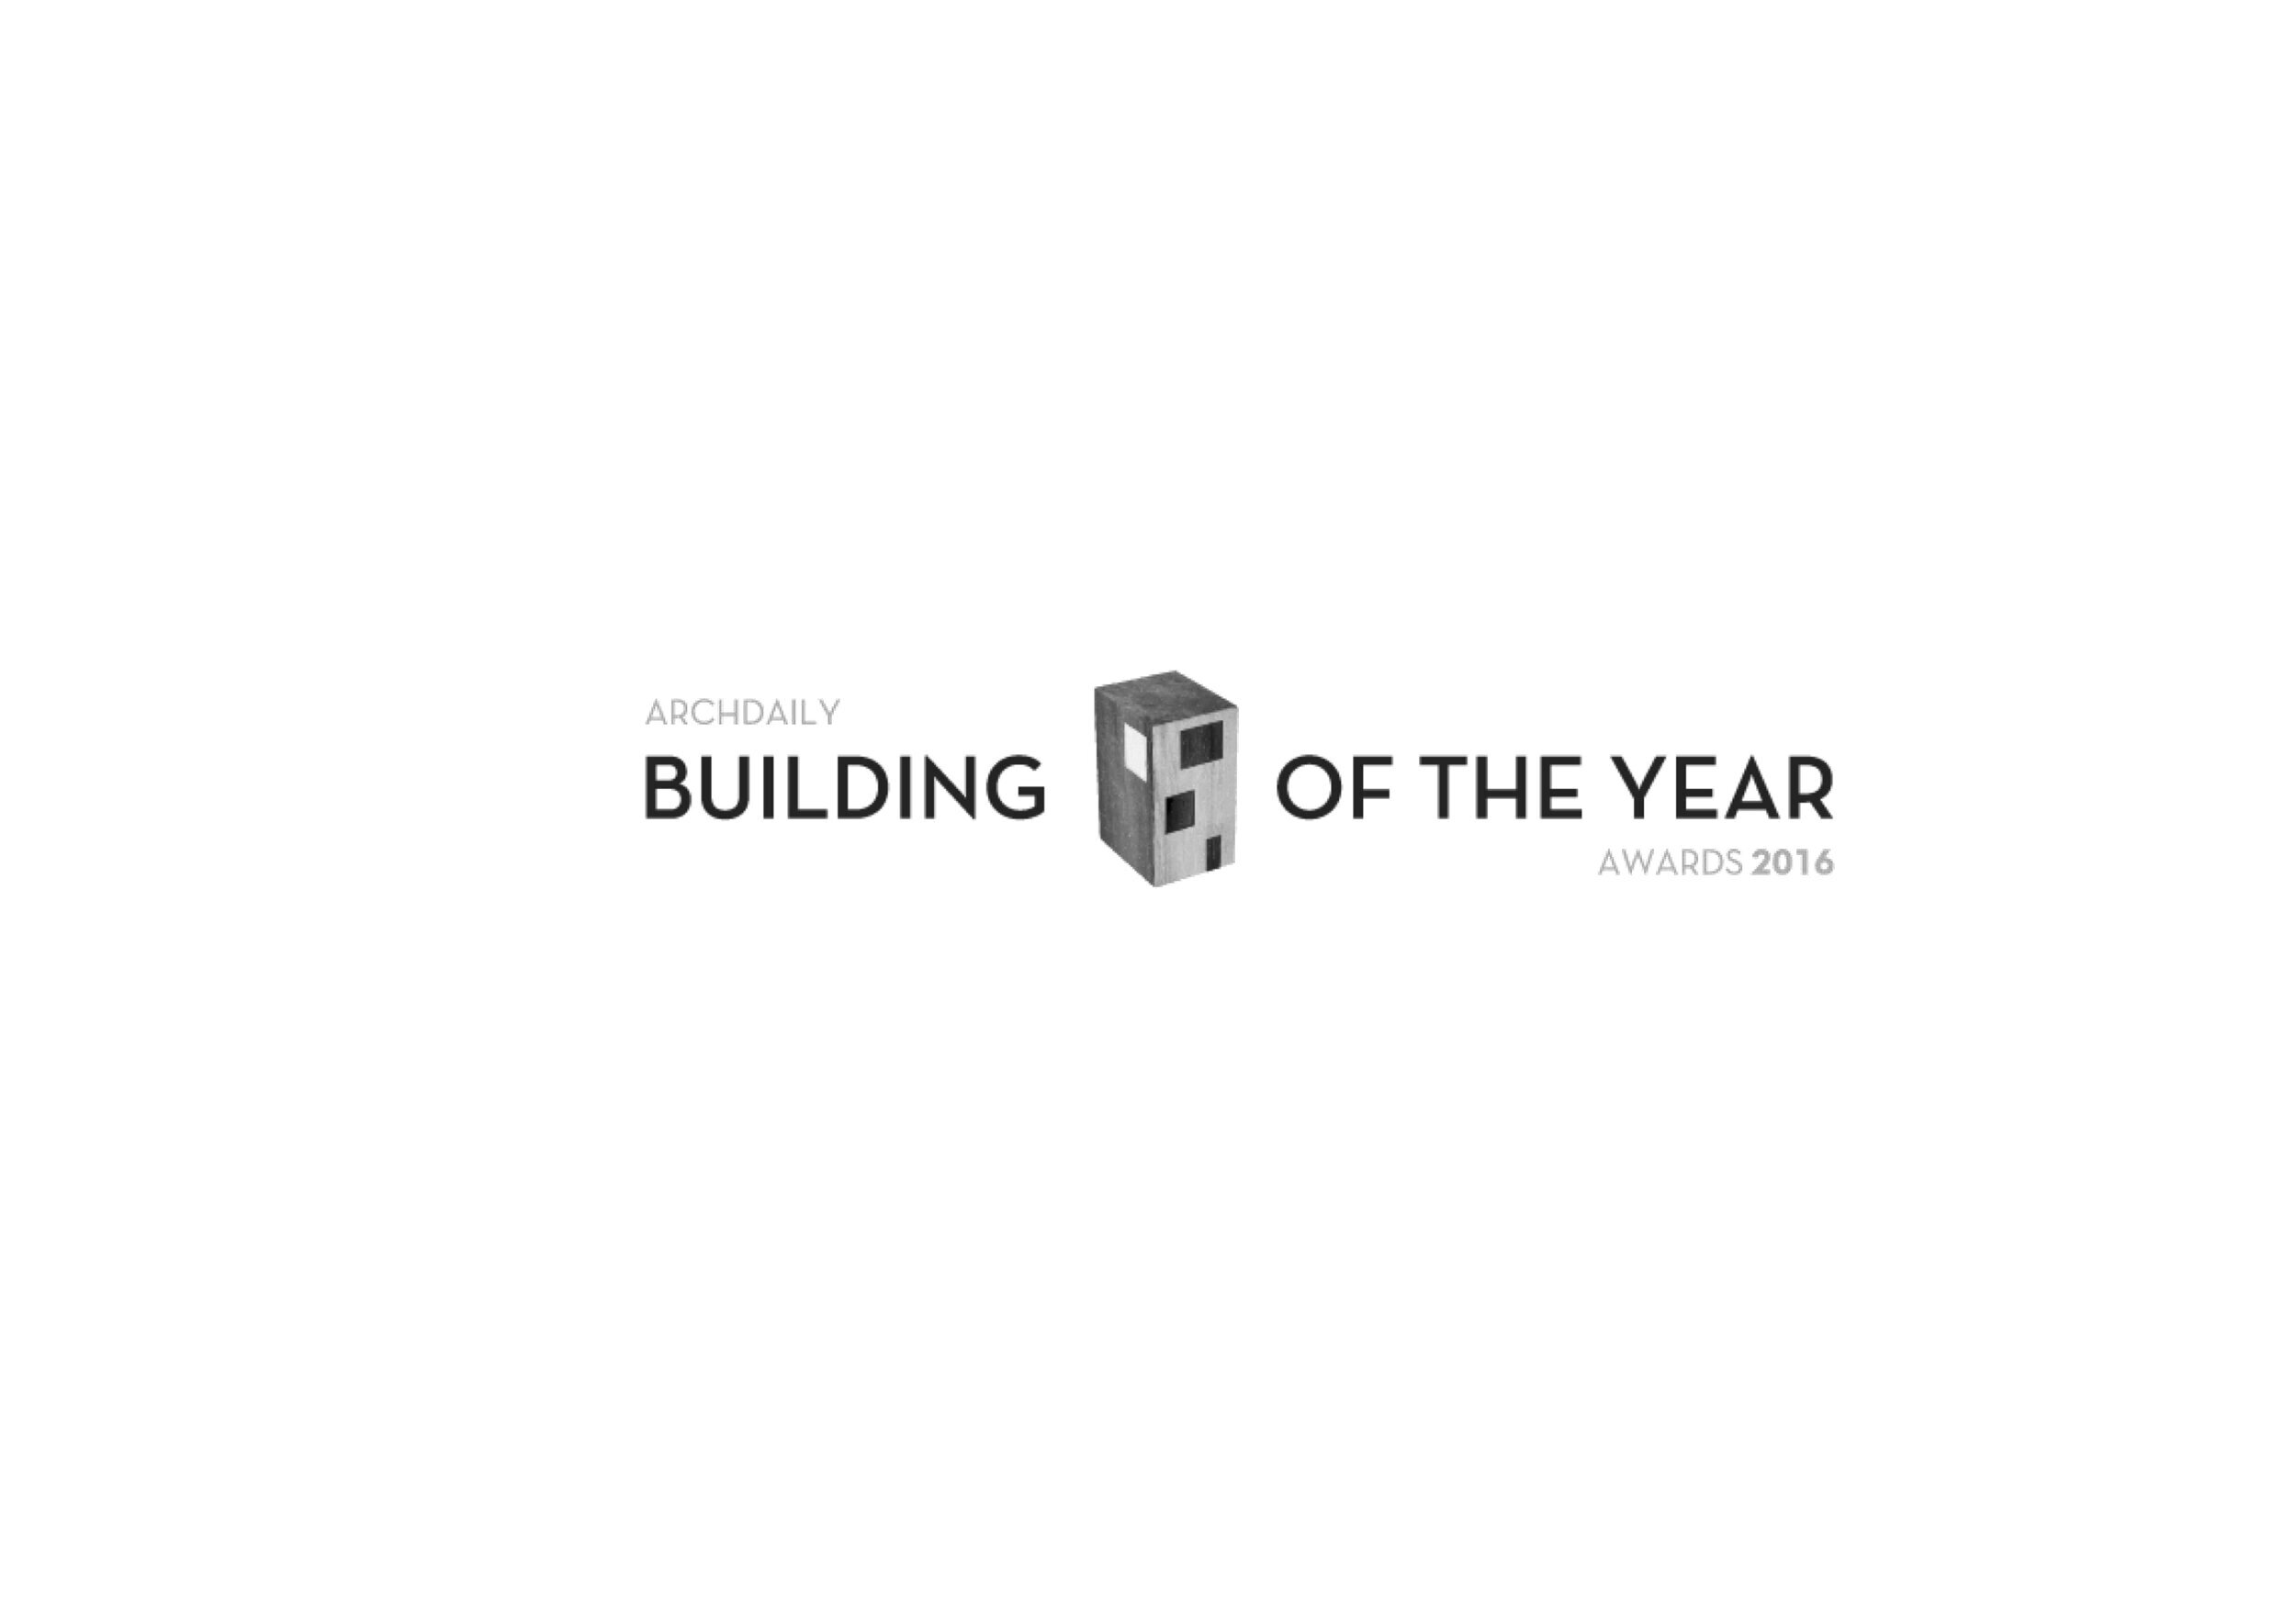 Archdaily_Building of the year 2016_GRAN FIERRO